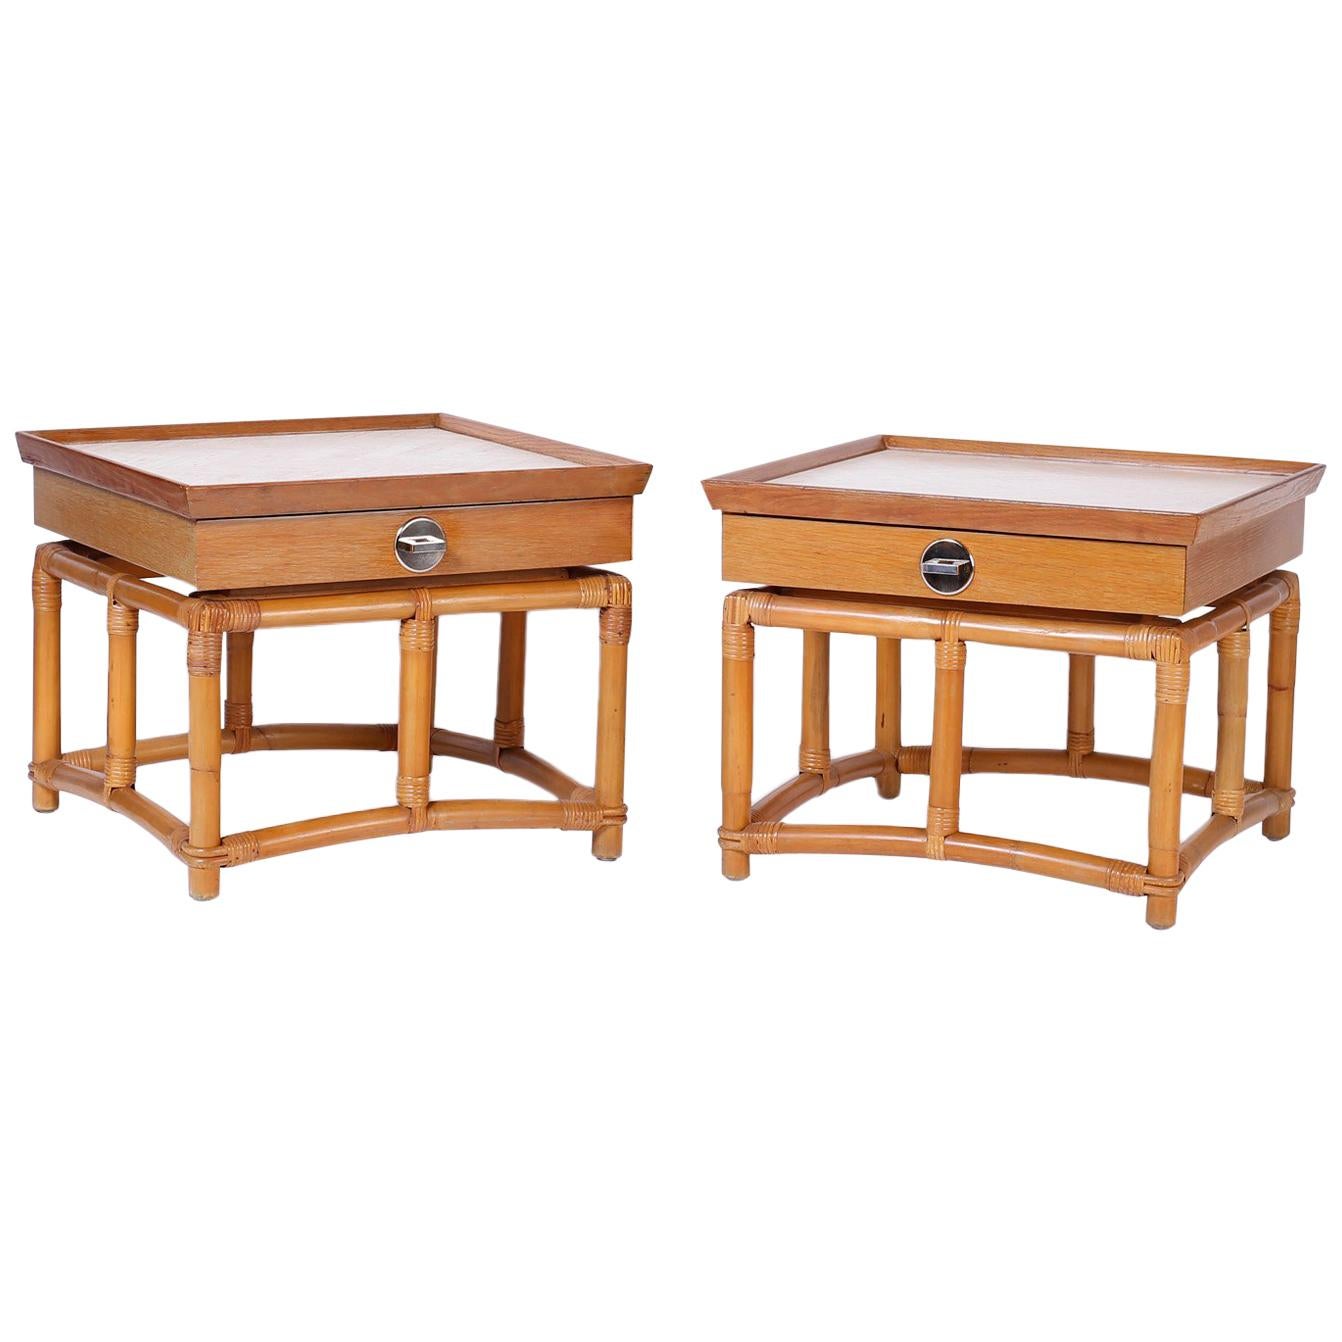 Pair of Midcentury Bamboo End Tables